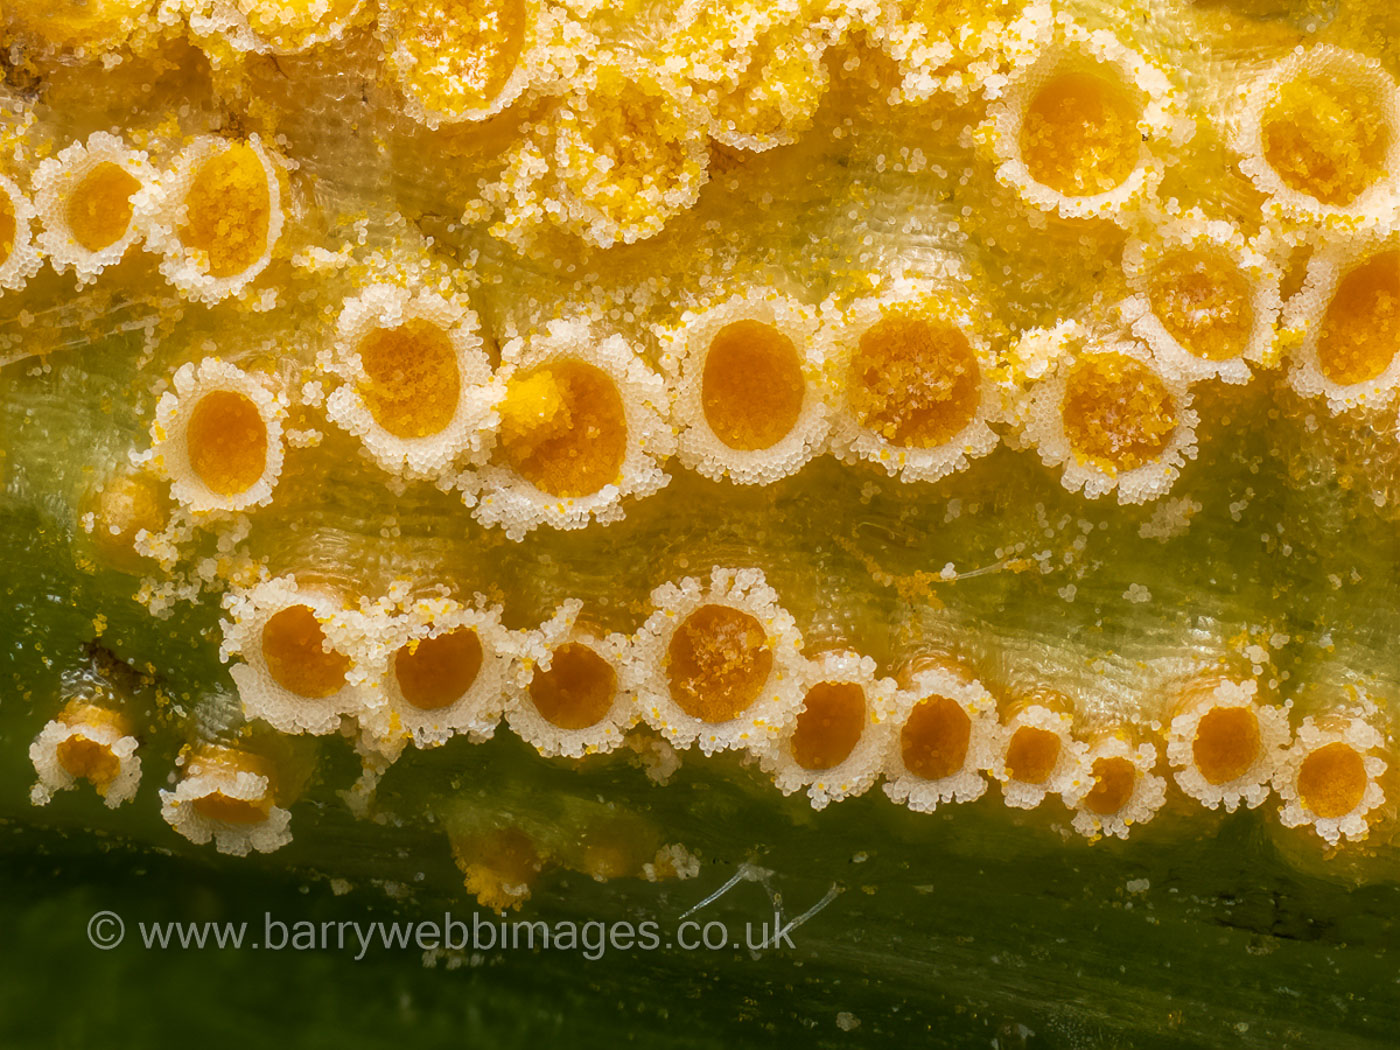 Puccinia urticata  by Barry Webb